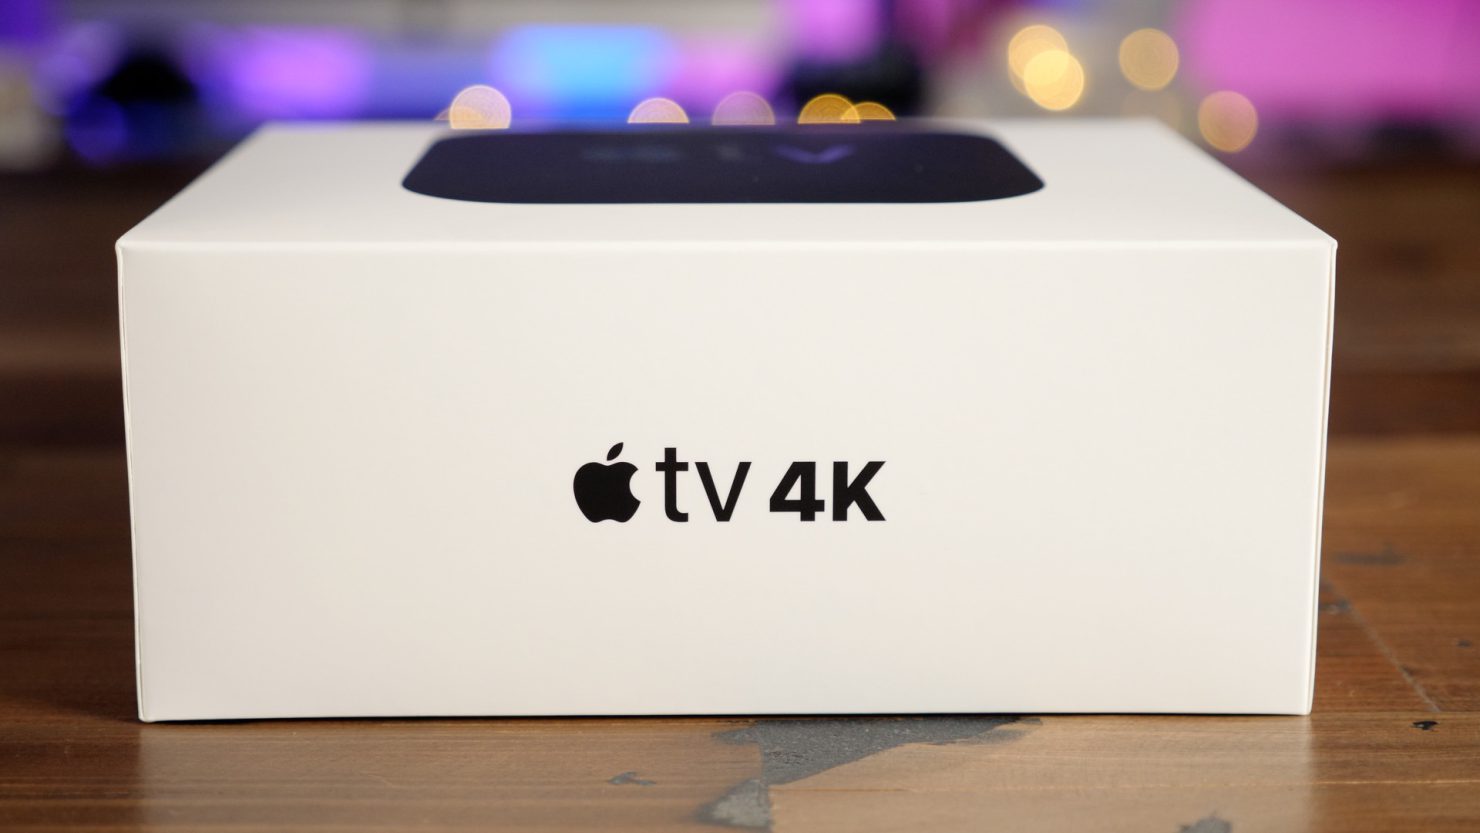 Black Friday Apple TV deals: Save on 4K models from $122 - 9to5Toys